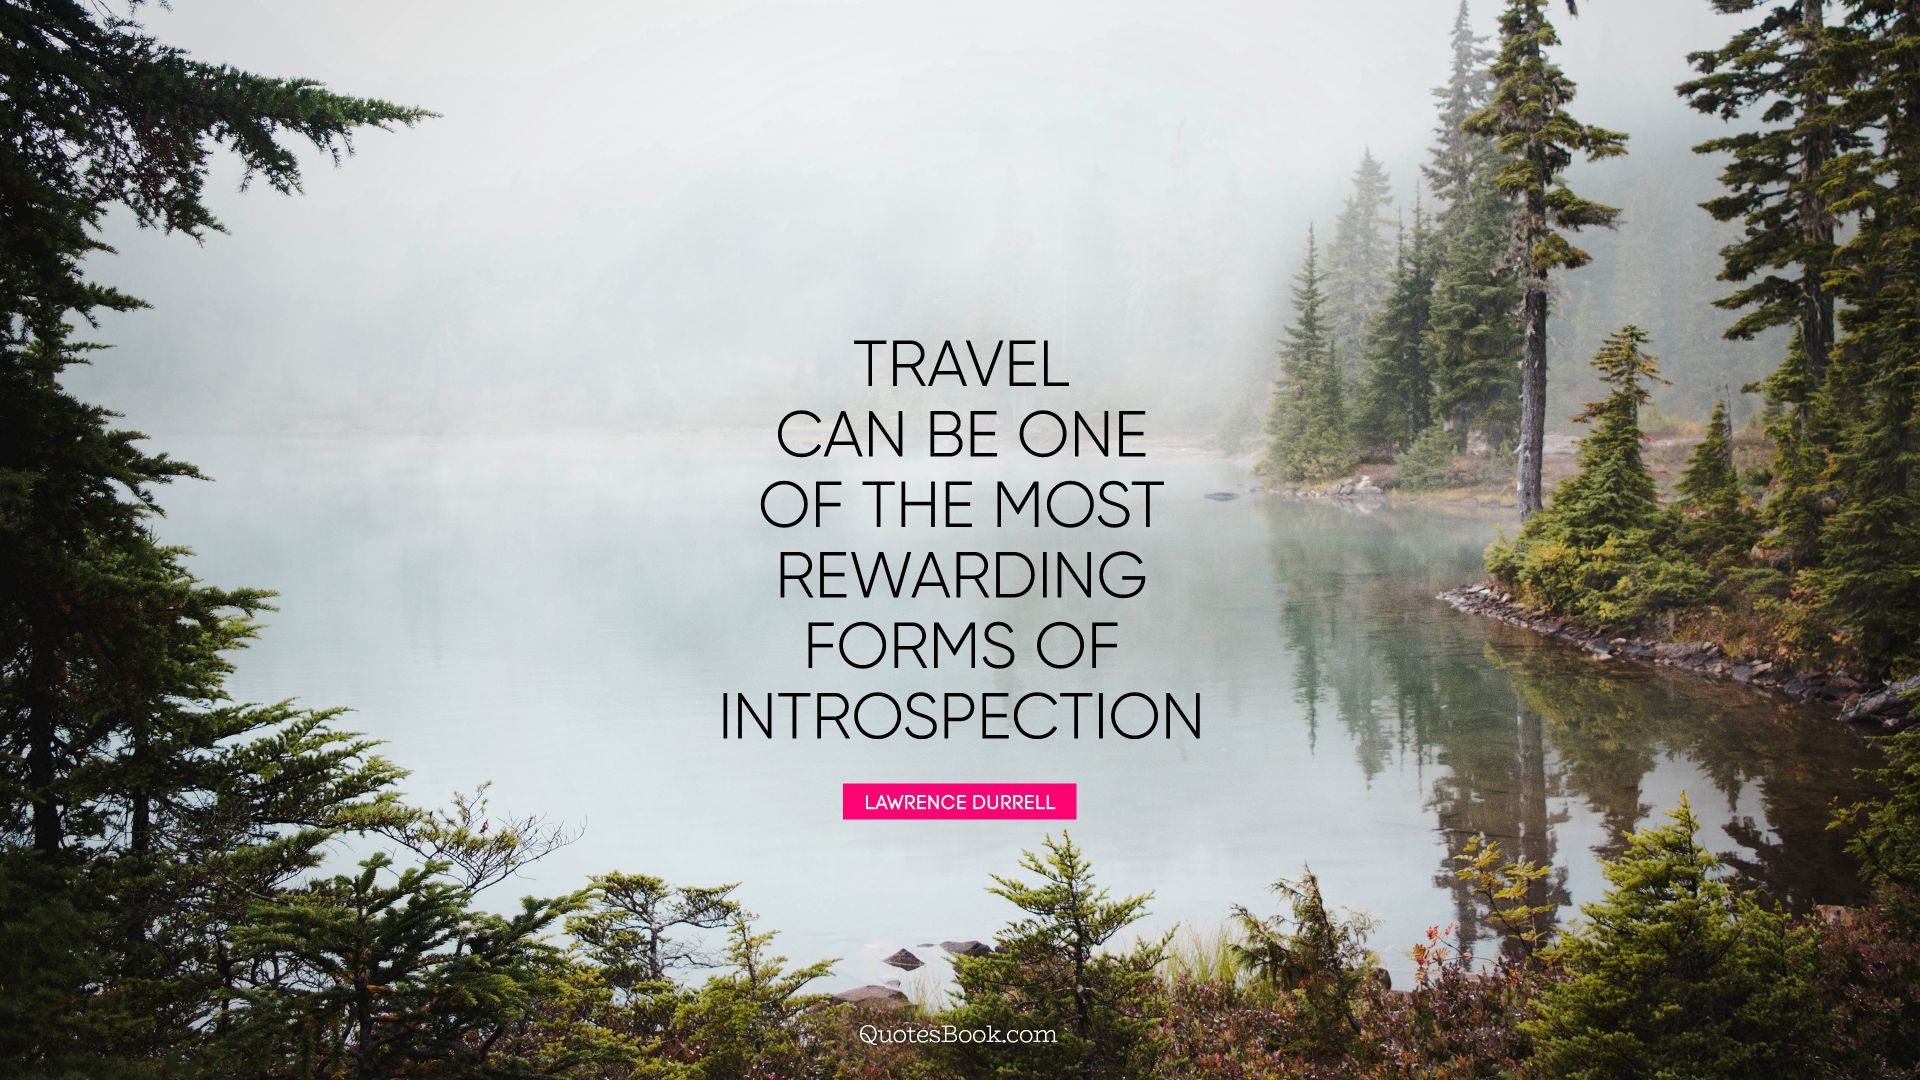 Travel can be one of the most rewarding forms of introspection. - Quote by Lawrence Durrell